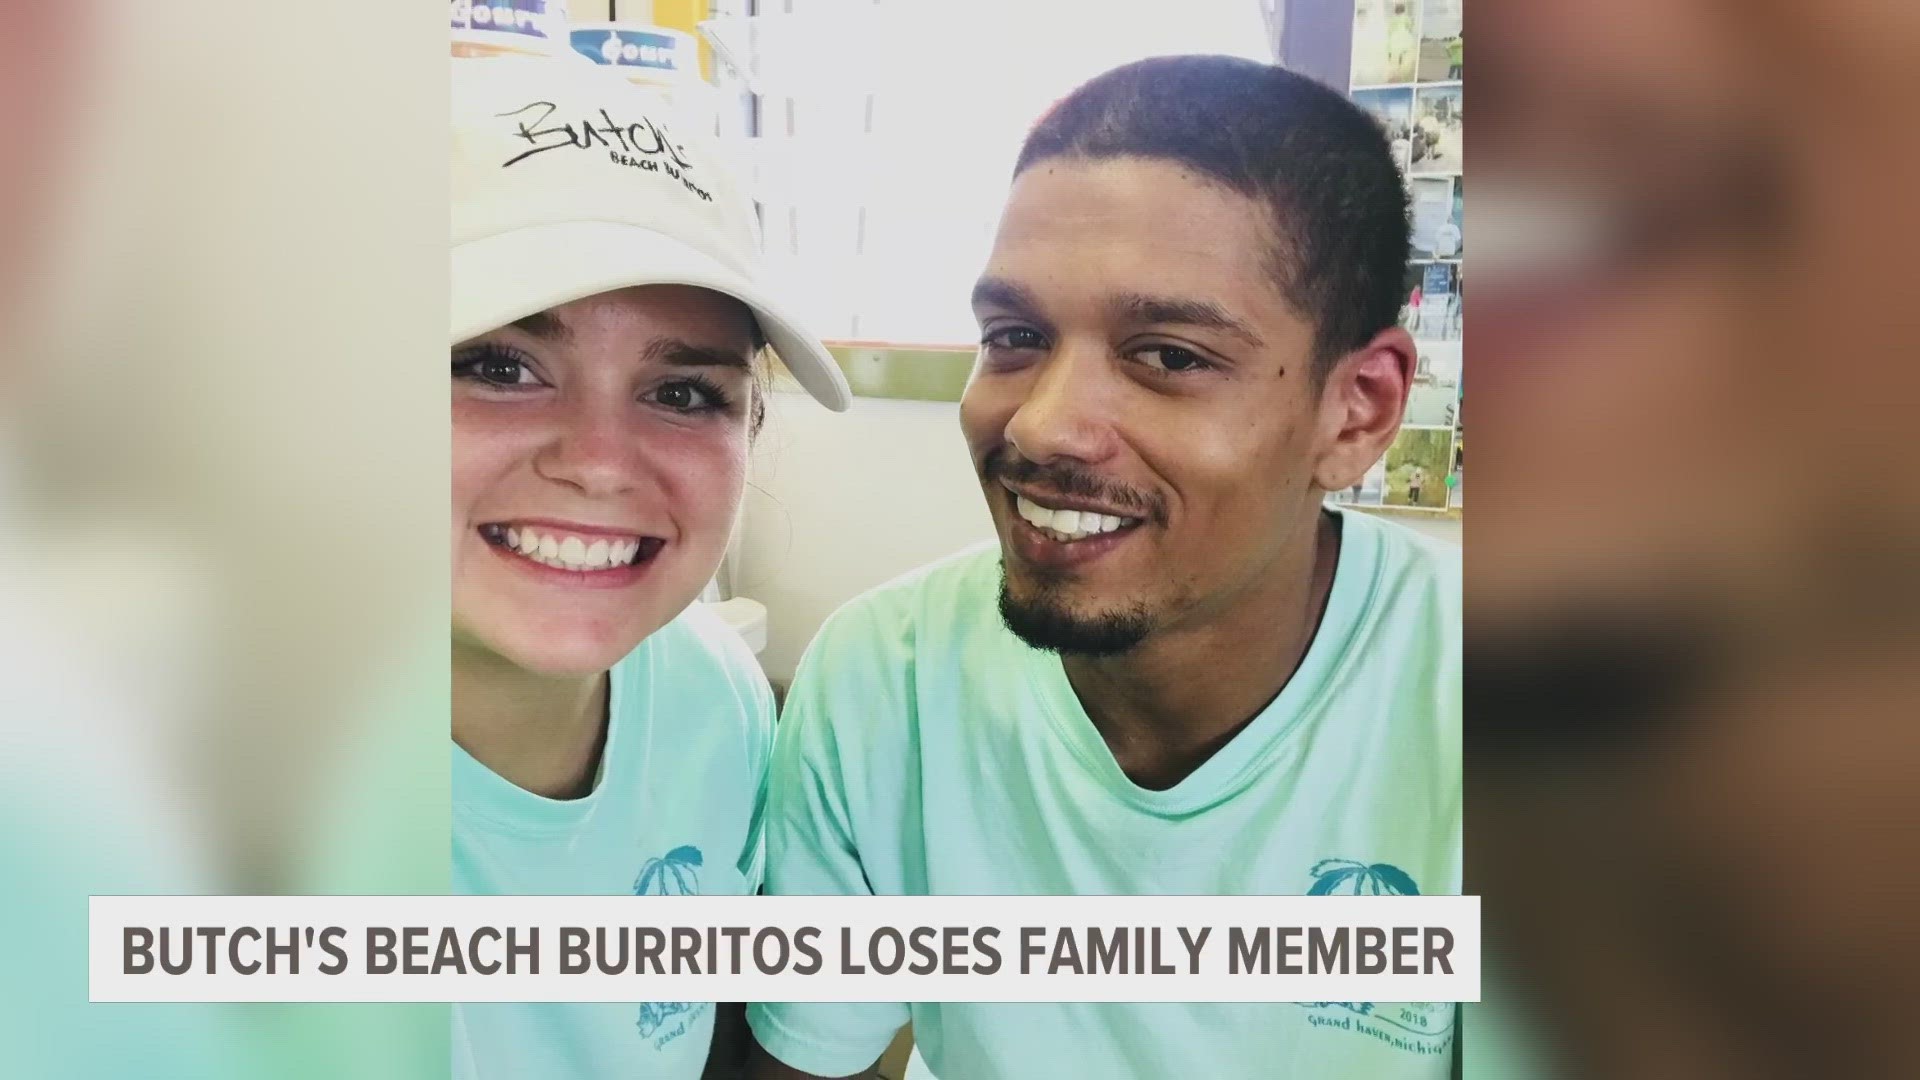 Anthony Thayer, a longtime employee at Butch's Beach Burritos in Grand Haven, died unexpectedly last week after suffering a seizure at the age of 35.